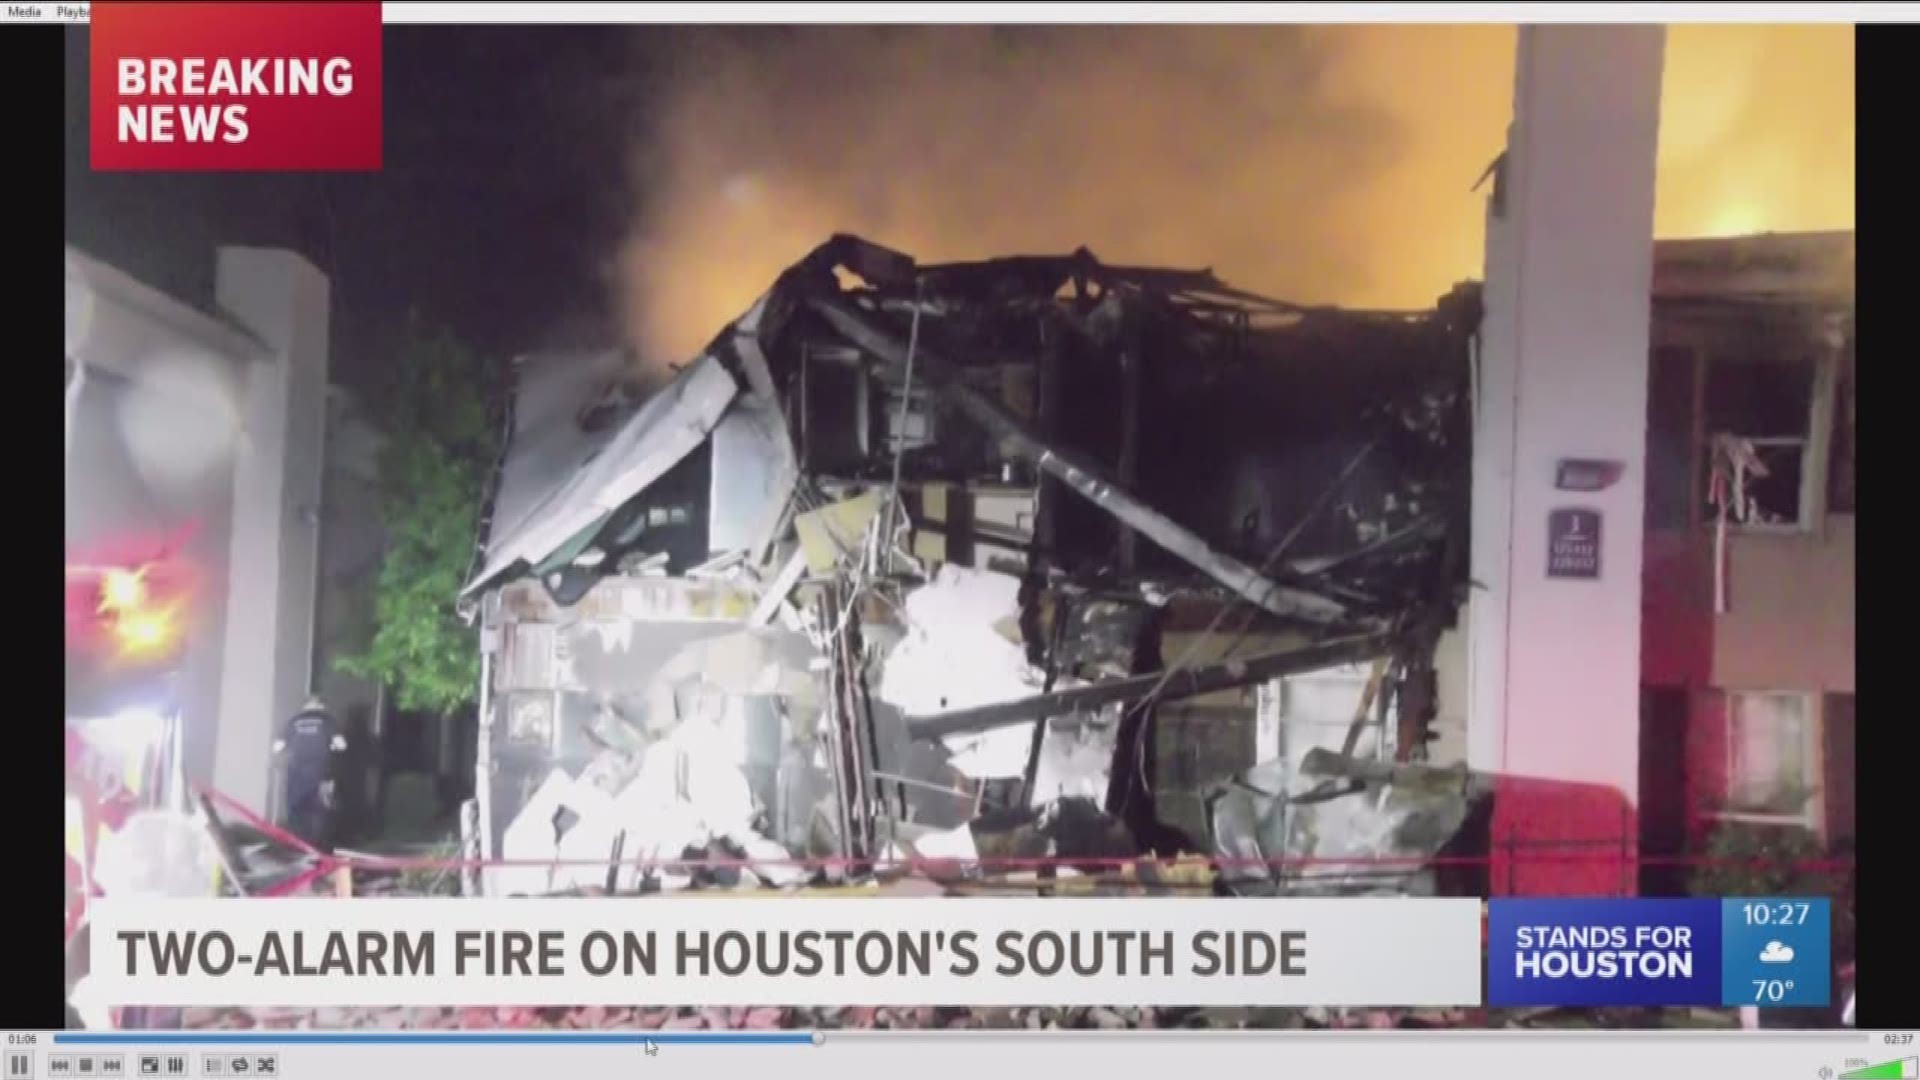 Several people were injured in an apartment fire in south Houston Sunday night